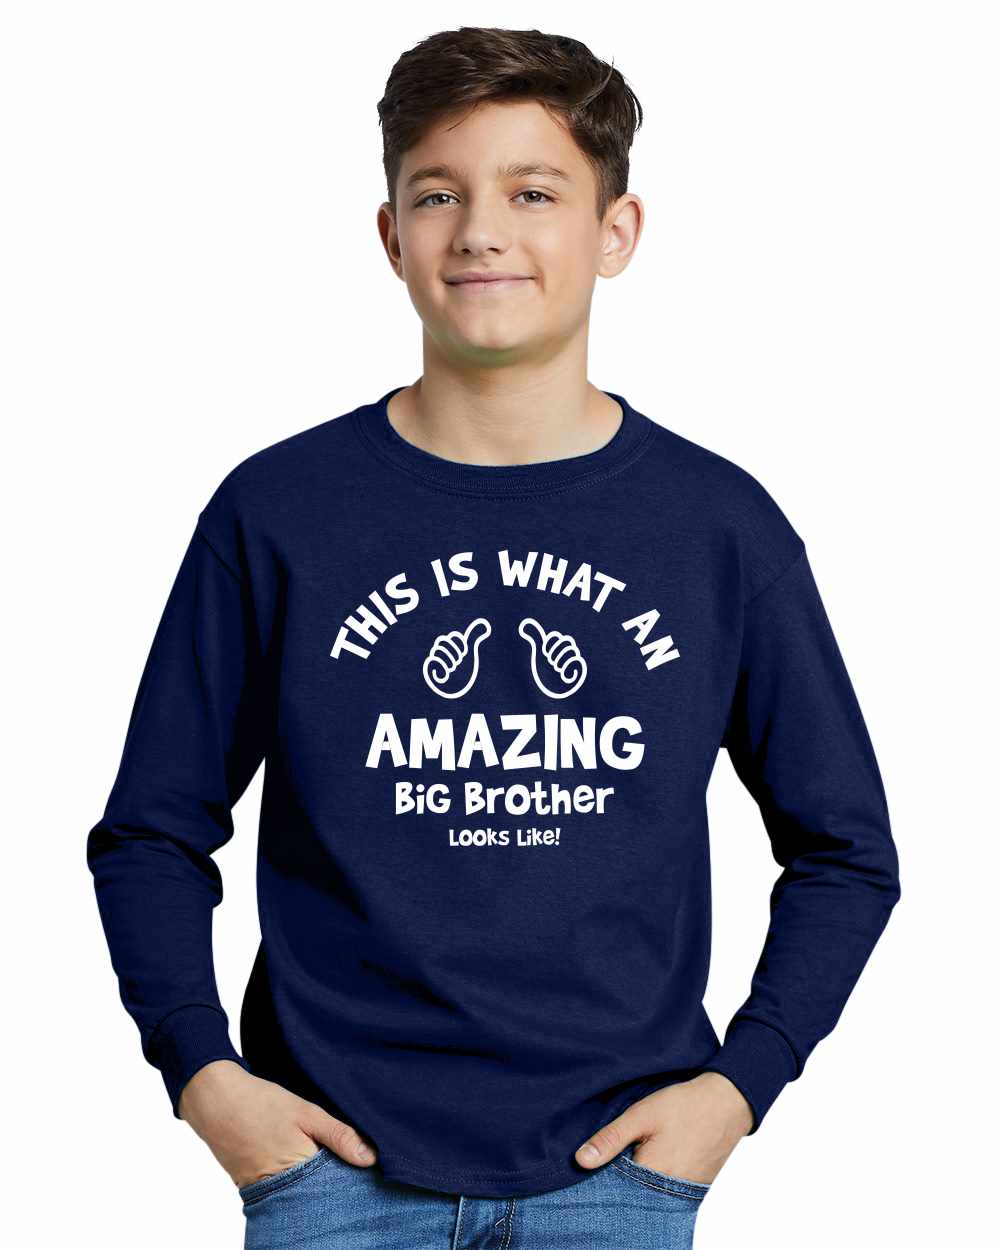 This is What an AMAZING Big Brother Looks Like on Youth Long Sleeve Shirt